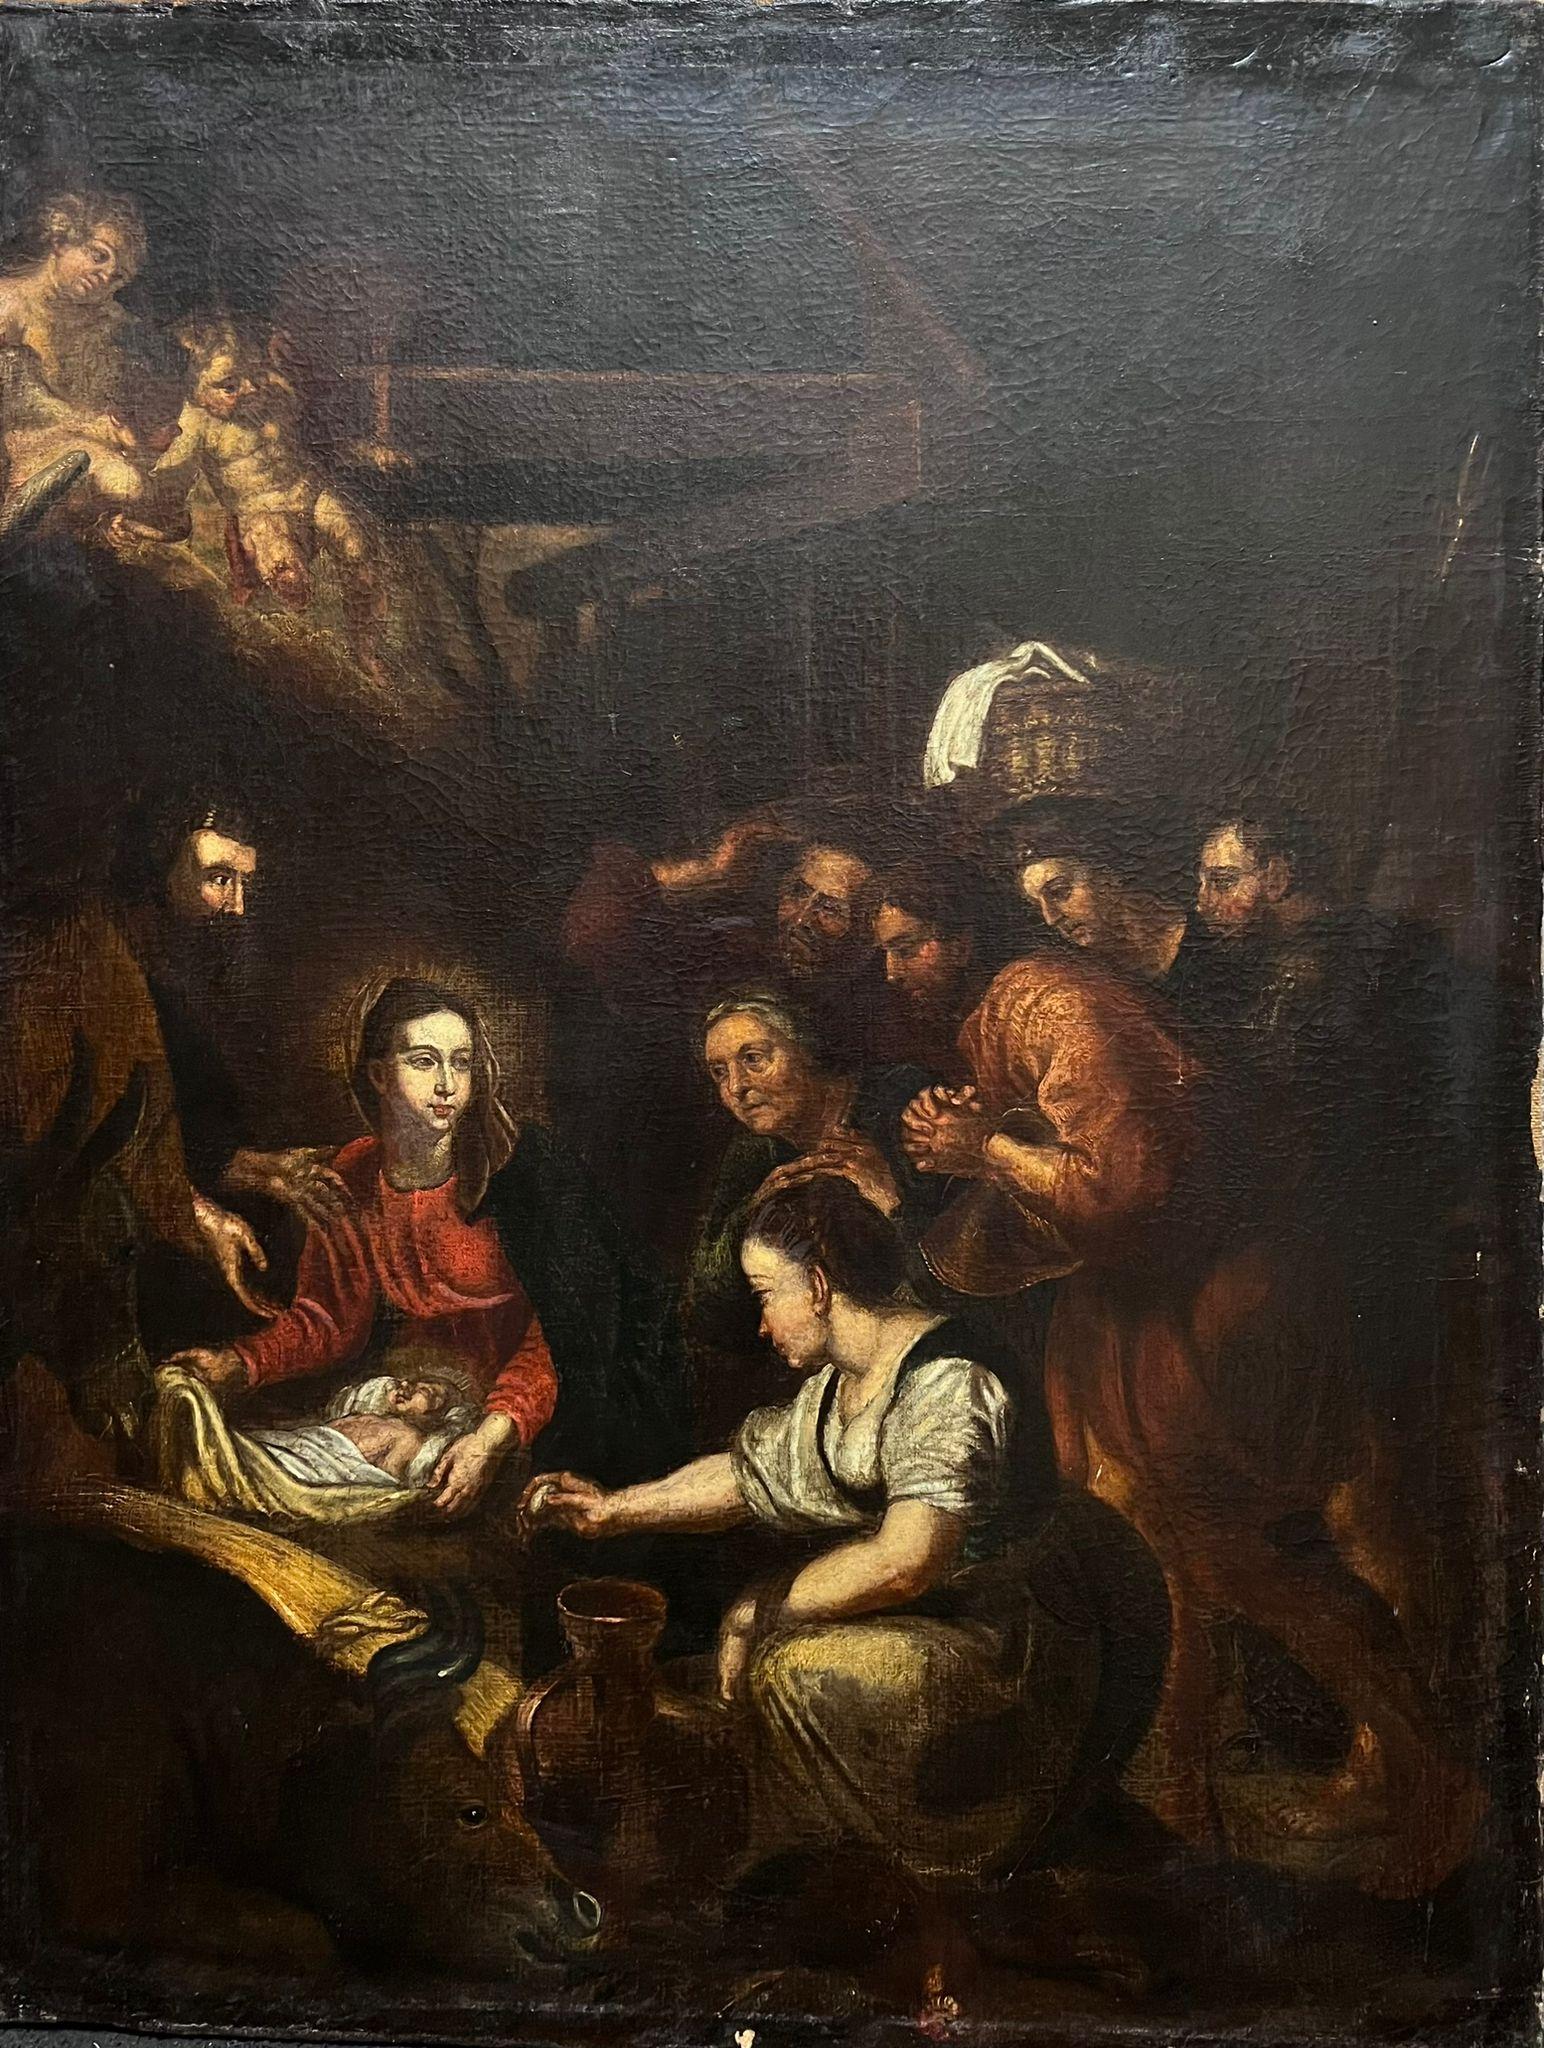 The Nativity
Dutch Old Master, early 1700's period
oil on canvas, unframed
canvas: 36 x 27.5 inches
provenance: private collection
condition: very good and sound condition, some scuffing/ paint loss to outer edges.